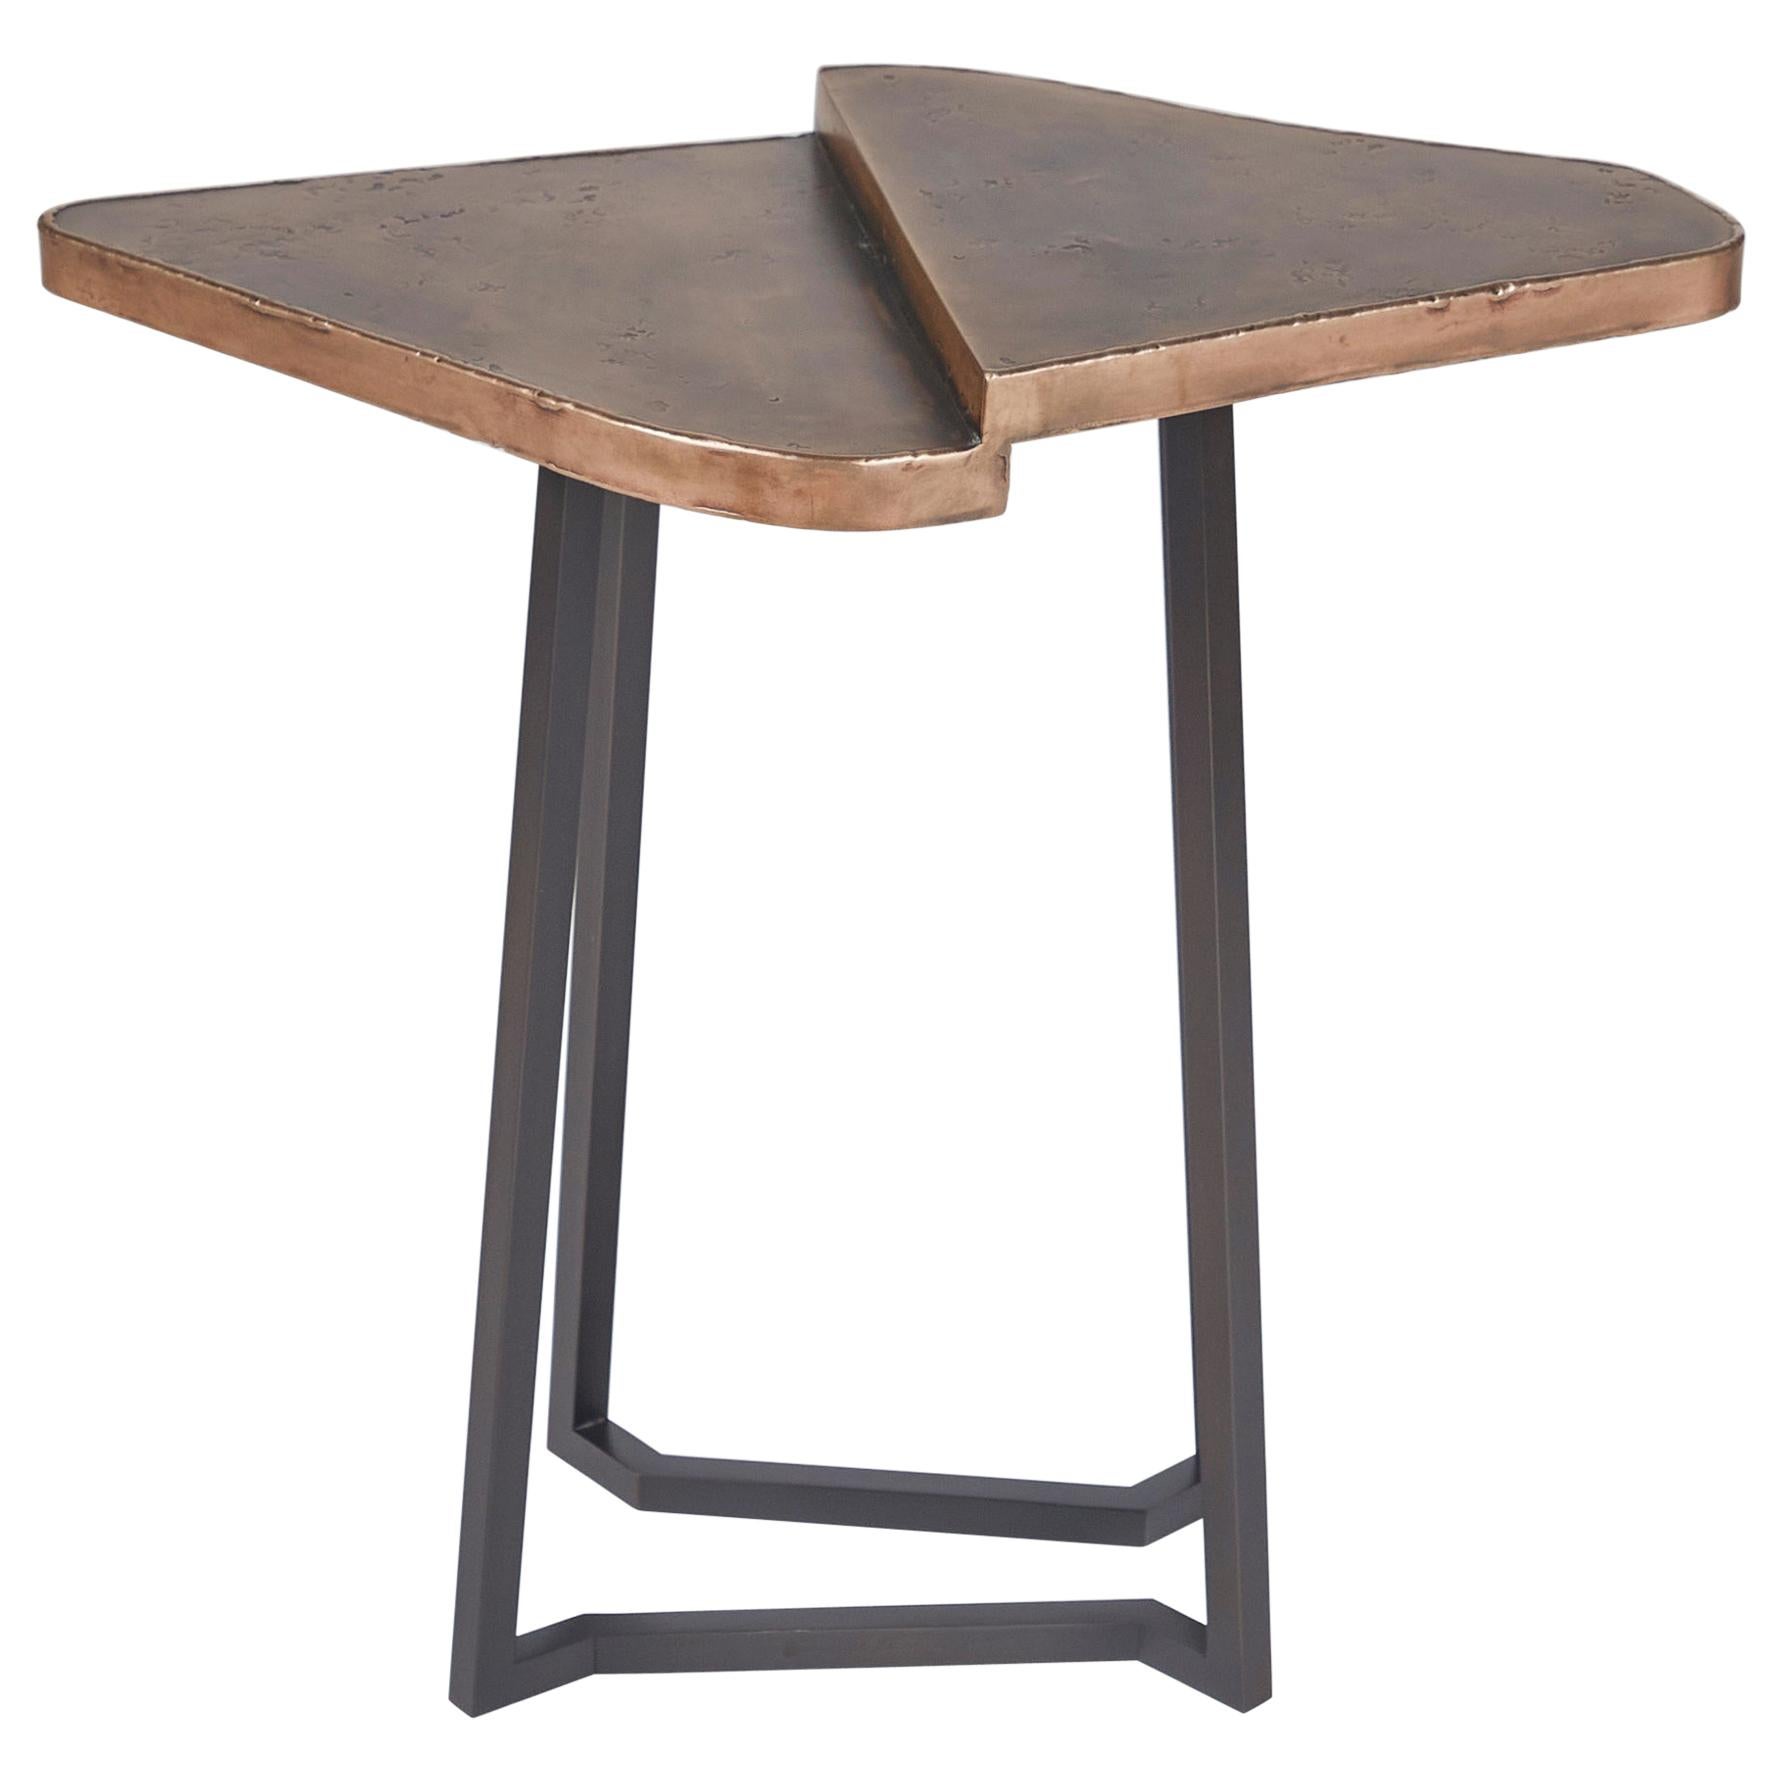 Douglas Fanning, Triangles, Two-Tiered Cocktail Table, United States, 2020